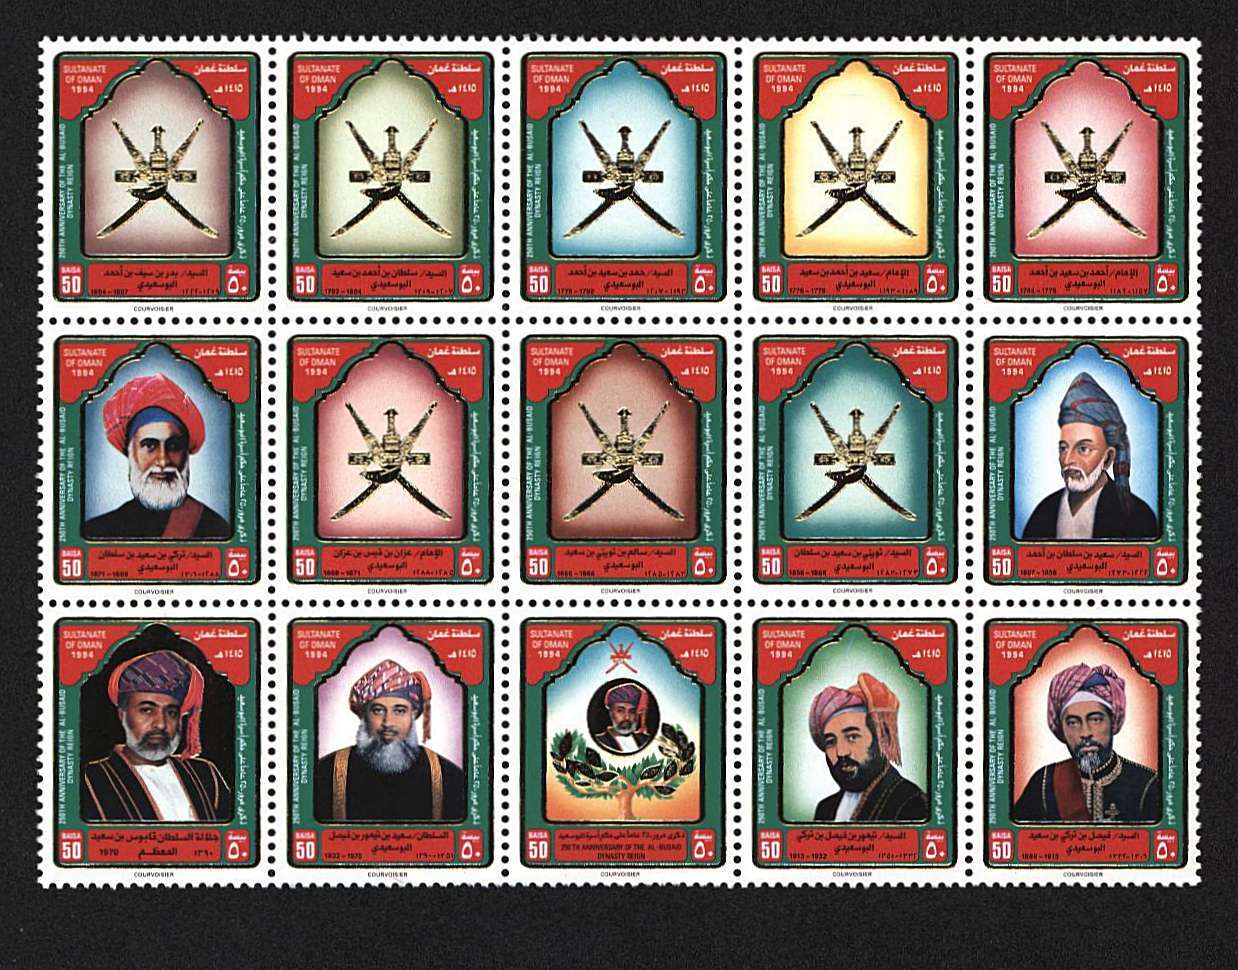 250th Anniversary of Al-Busaid Dynasty<br/>A superb unmounted block of fifteen.